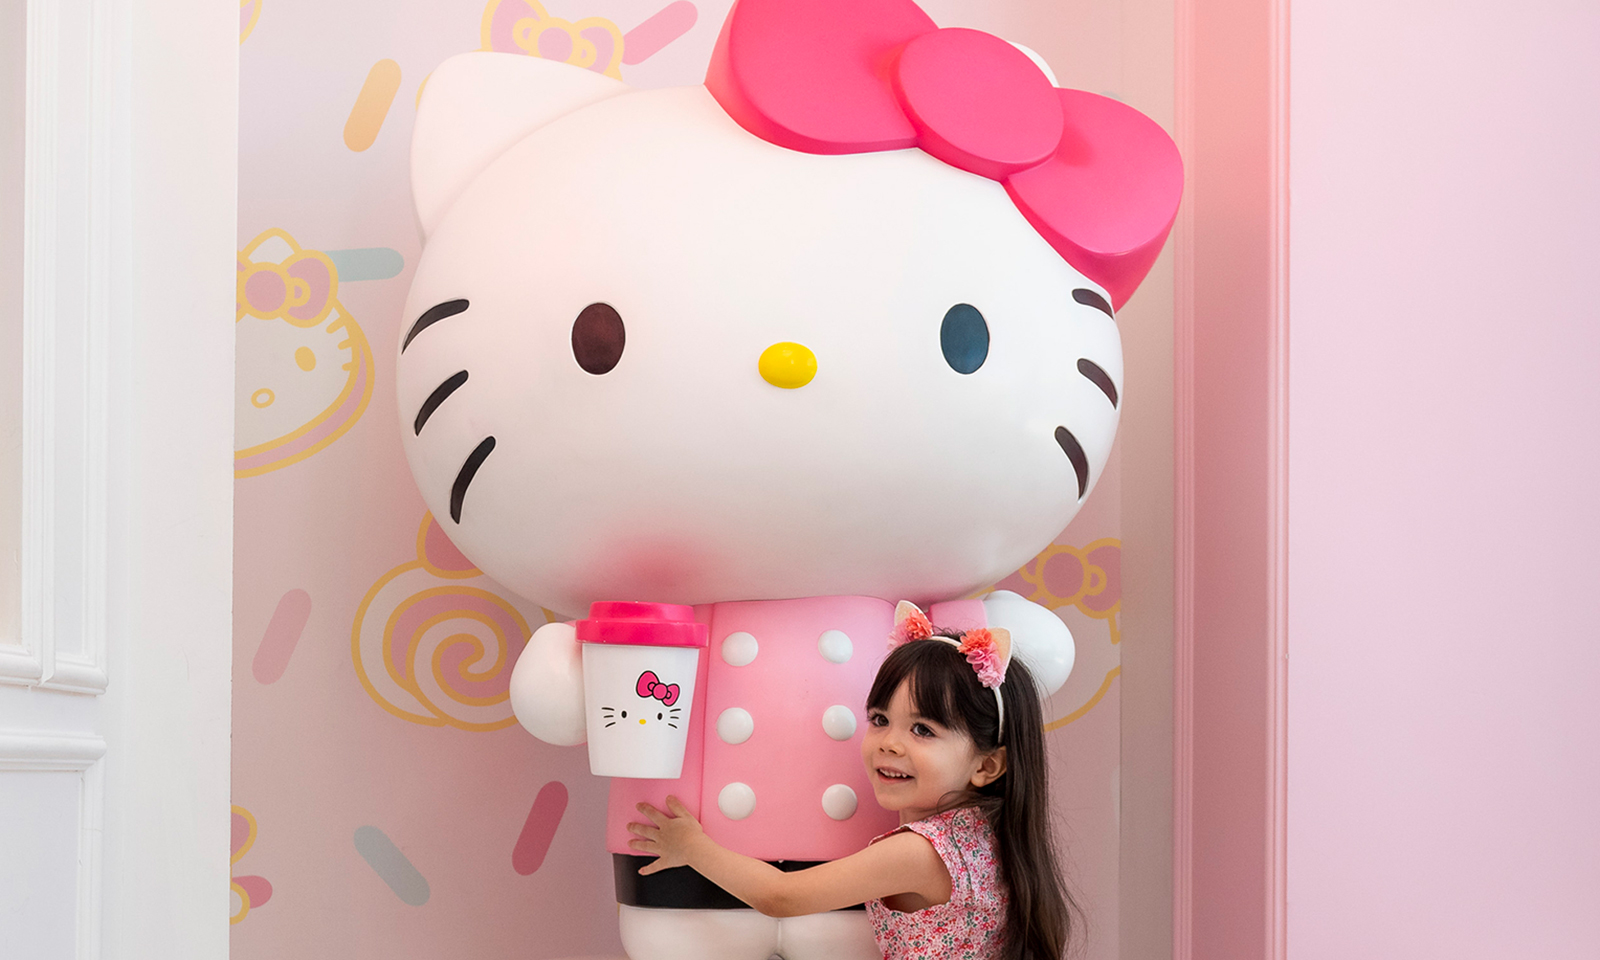 Say hello to a new Hello Kitty store